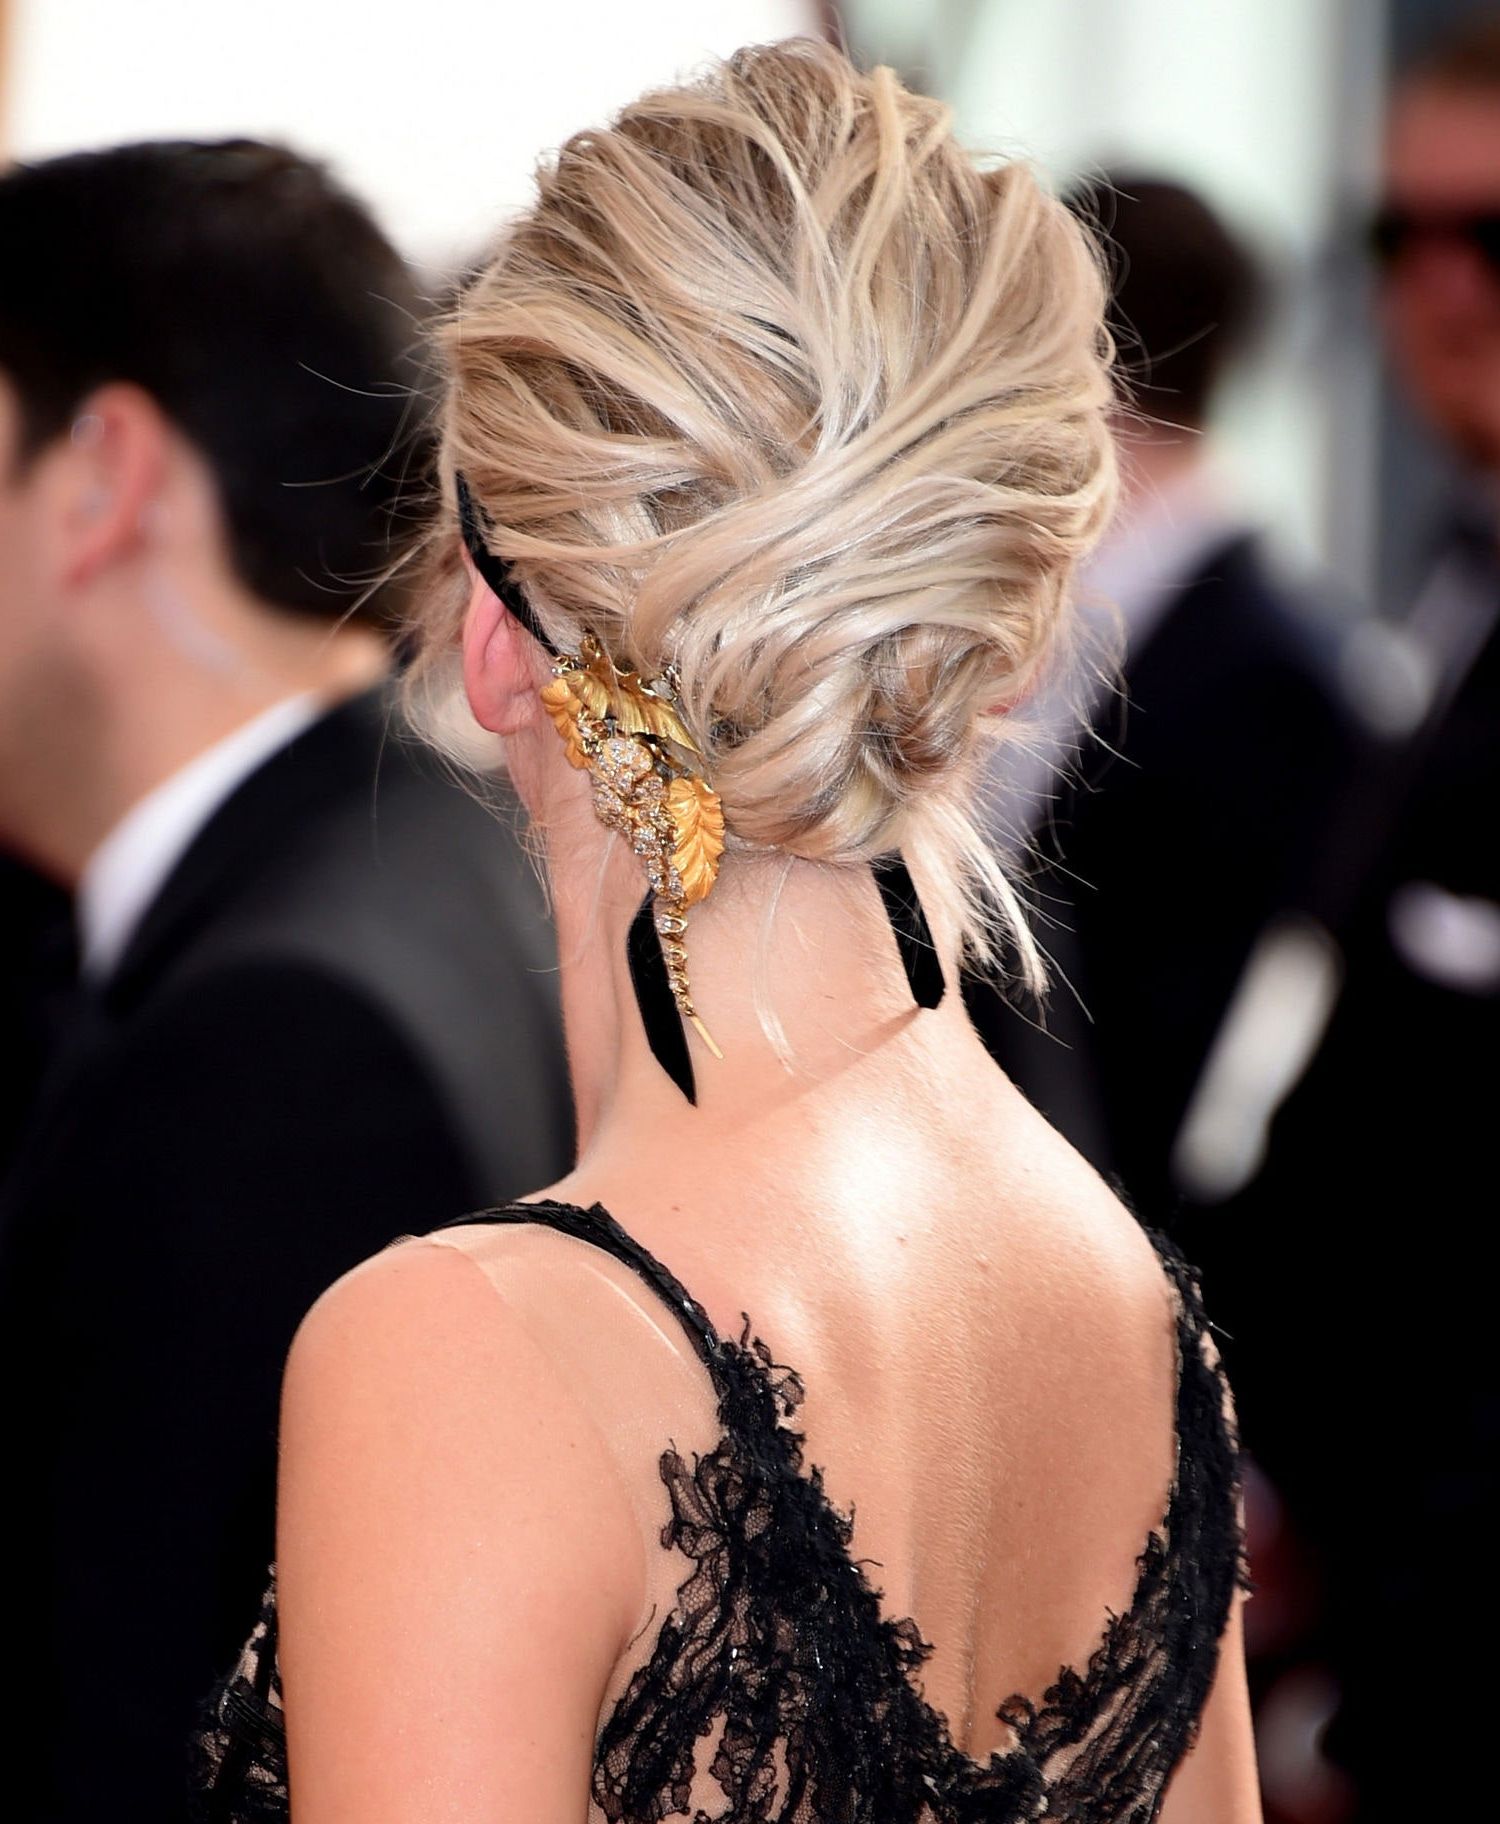 10 Easy Party Hairstyles And Updos You Should Try Asap | Glamour Inside Easy Evening Upstyle (View 8 of 25)